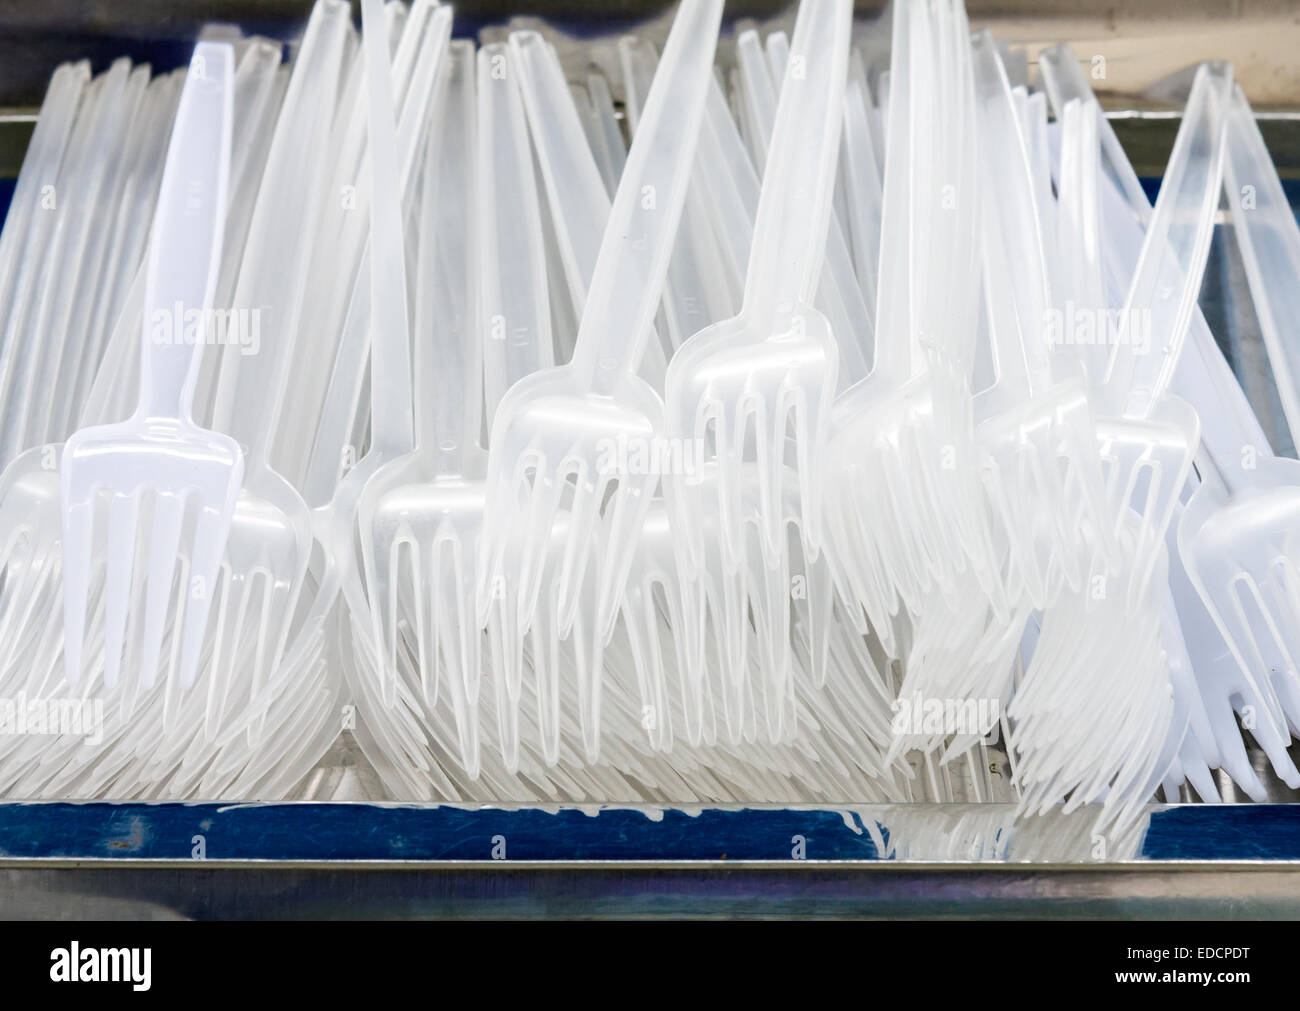 White plastic fork on the metal tray. Stock Photo